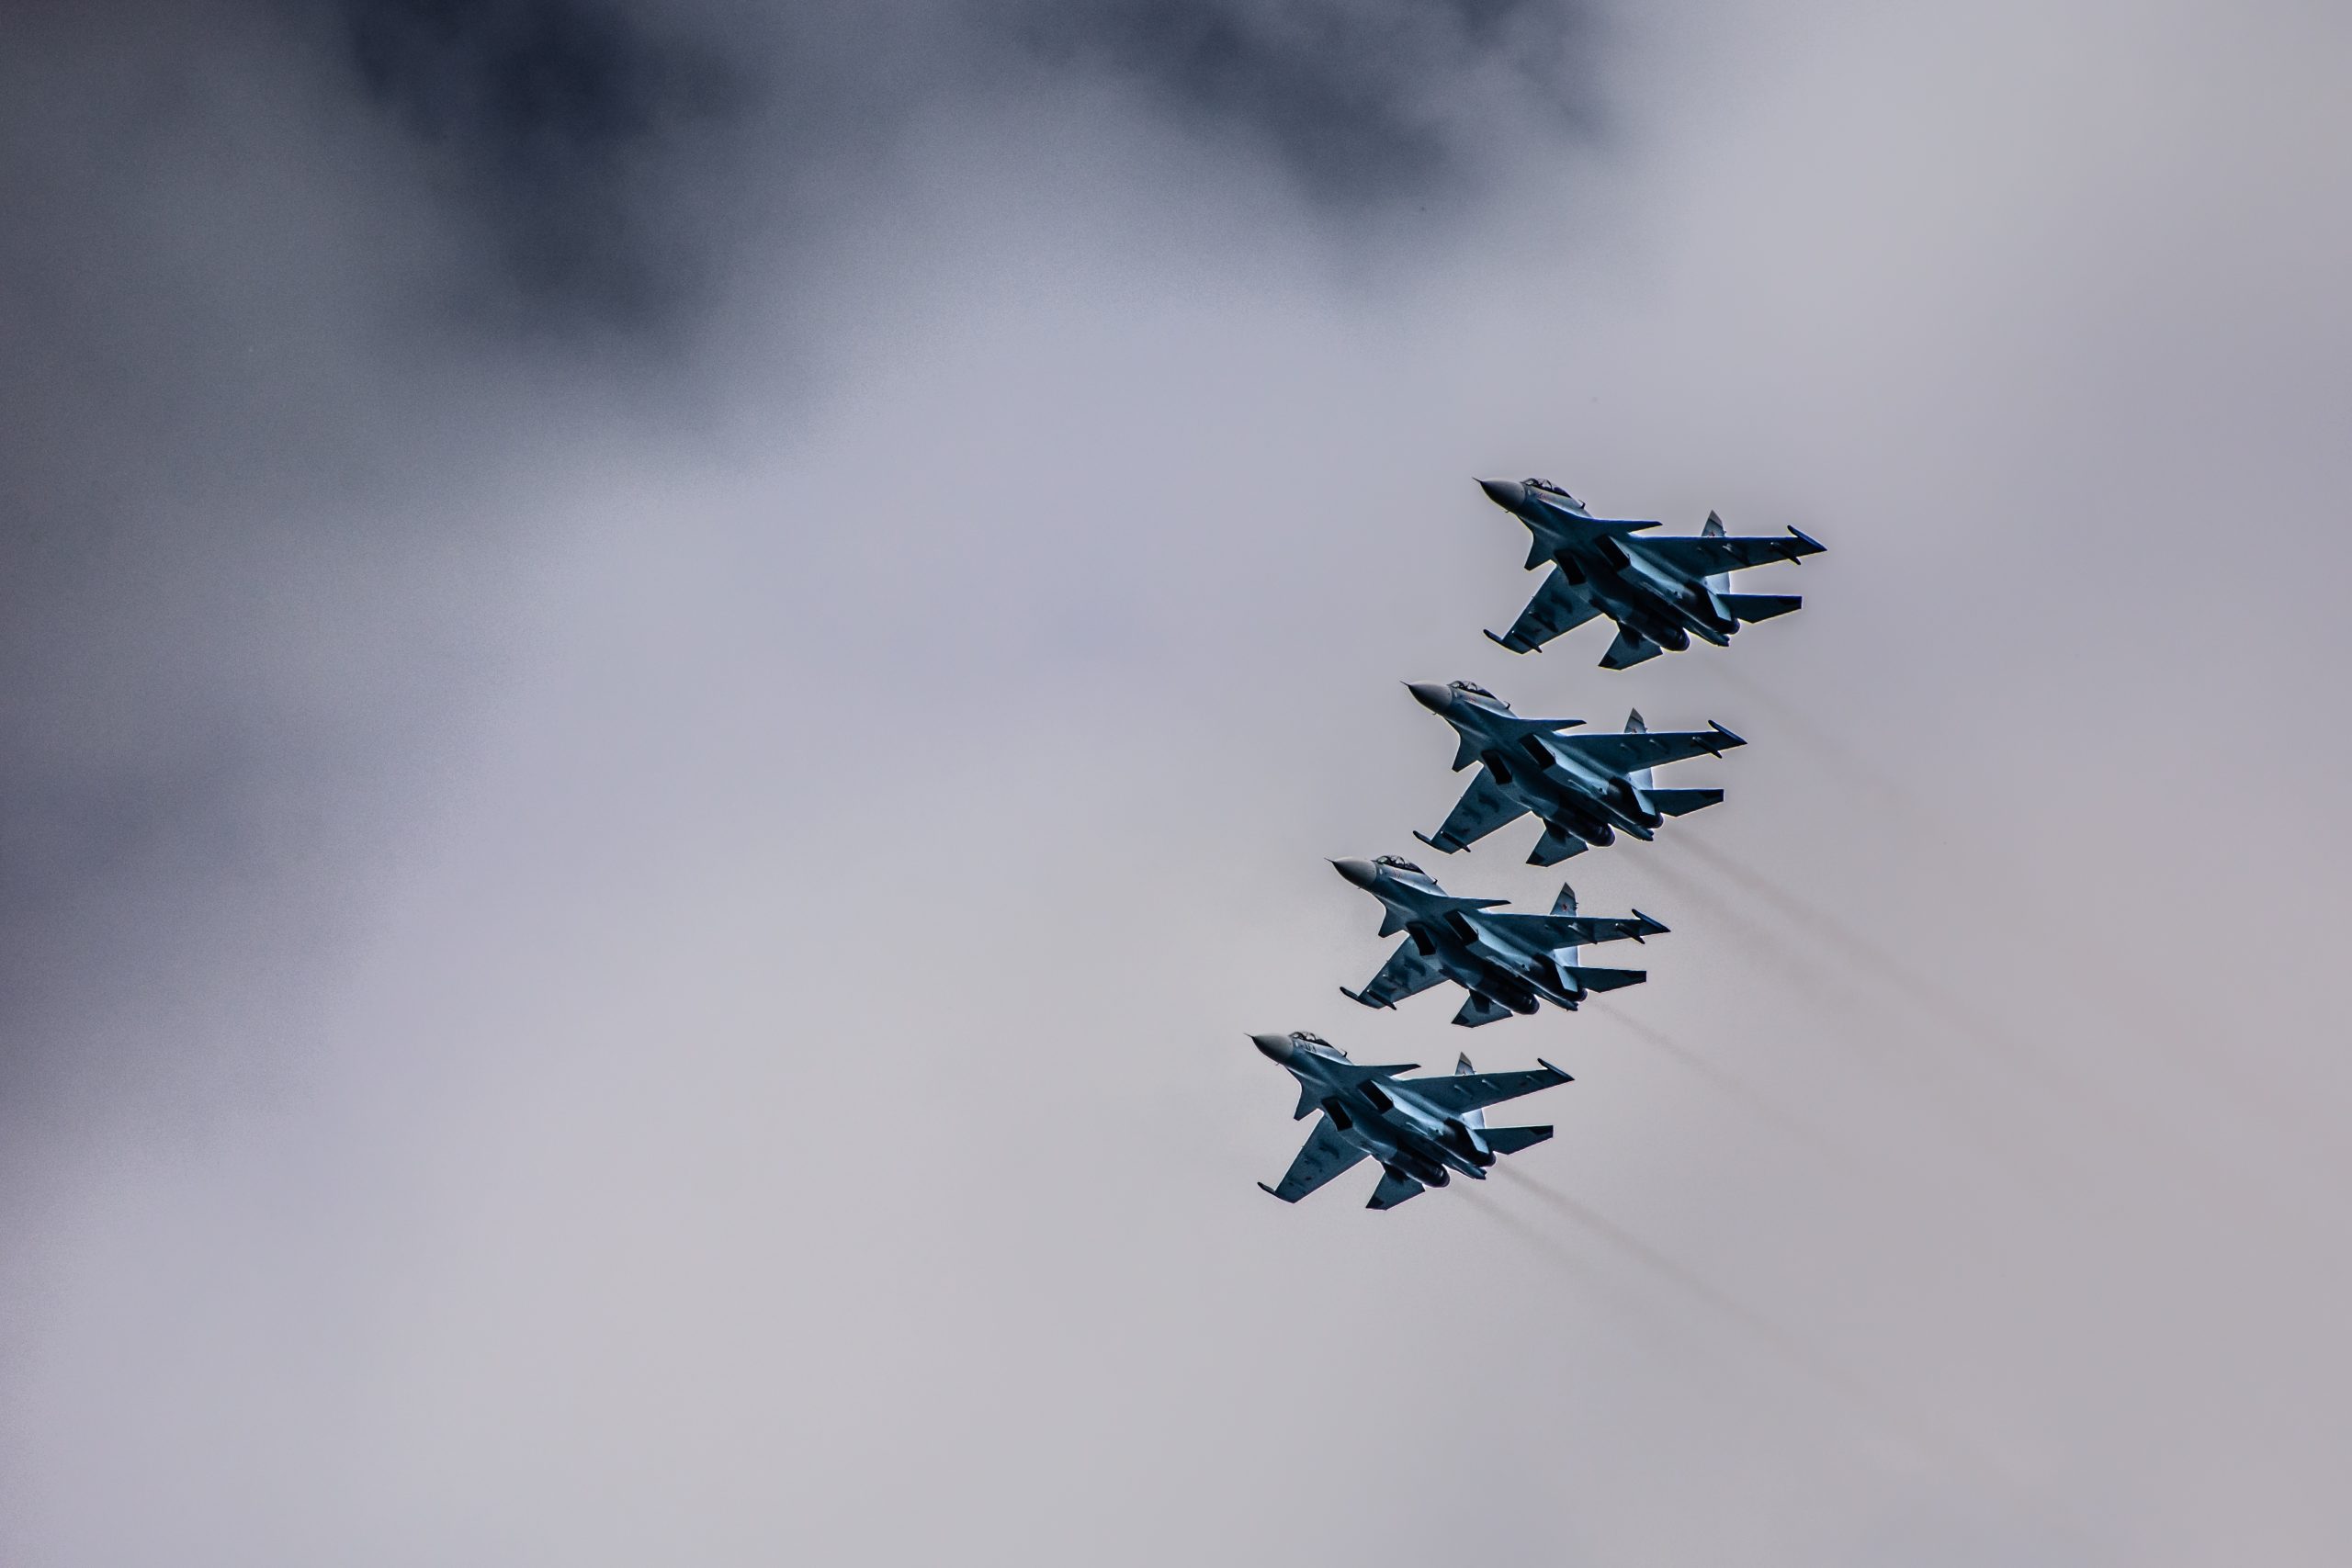 Russia Launches 2-Weeks of Joint Aerial Exercises With Belarus – West Watches Anxiously